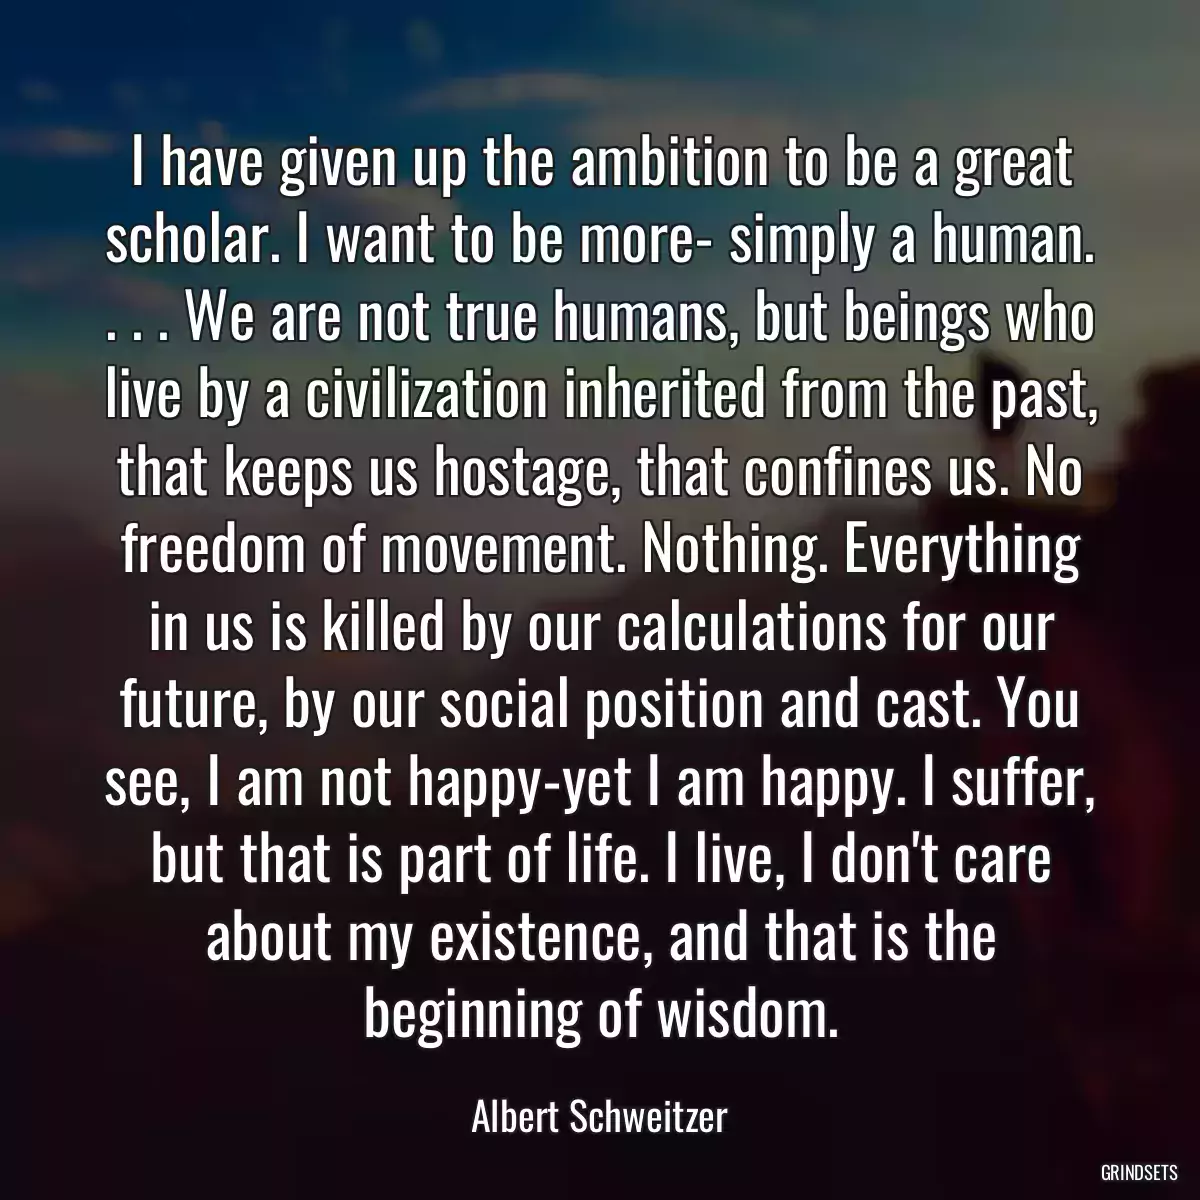 I have given up the ambition to be a great scholar. I want to be more- simply a human. . . . We are not true humans, but beings who live by a civilization inherited from the past, that keeps us hostage, that confines us. No freedom of movement. Nothing. Everything in us is killed by our calculations for our future, by our social position and cast. You see, I am not happy-yet I am happy. I suffer, but that is part of life. I live, I don\'t care about my existence, and that is the beginning of wisdom.